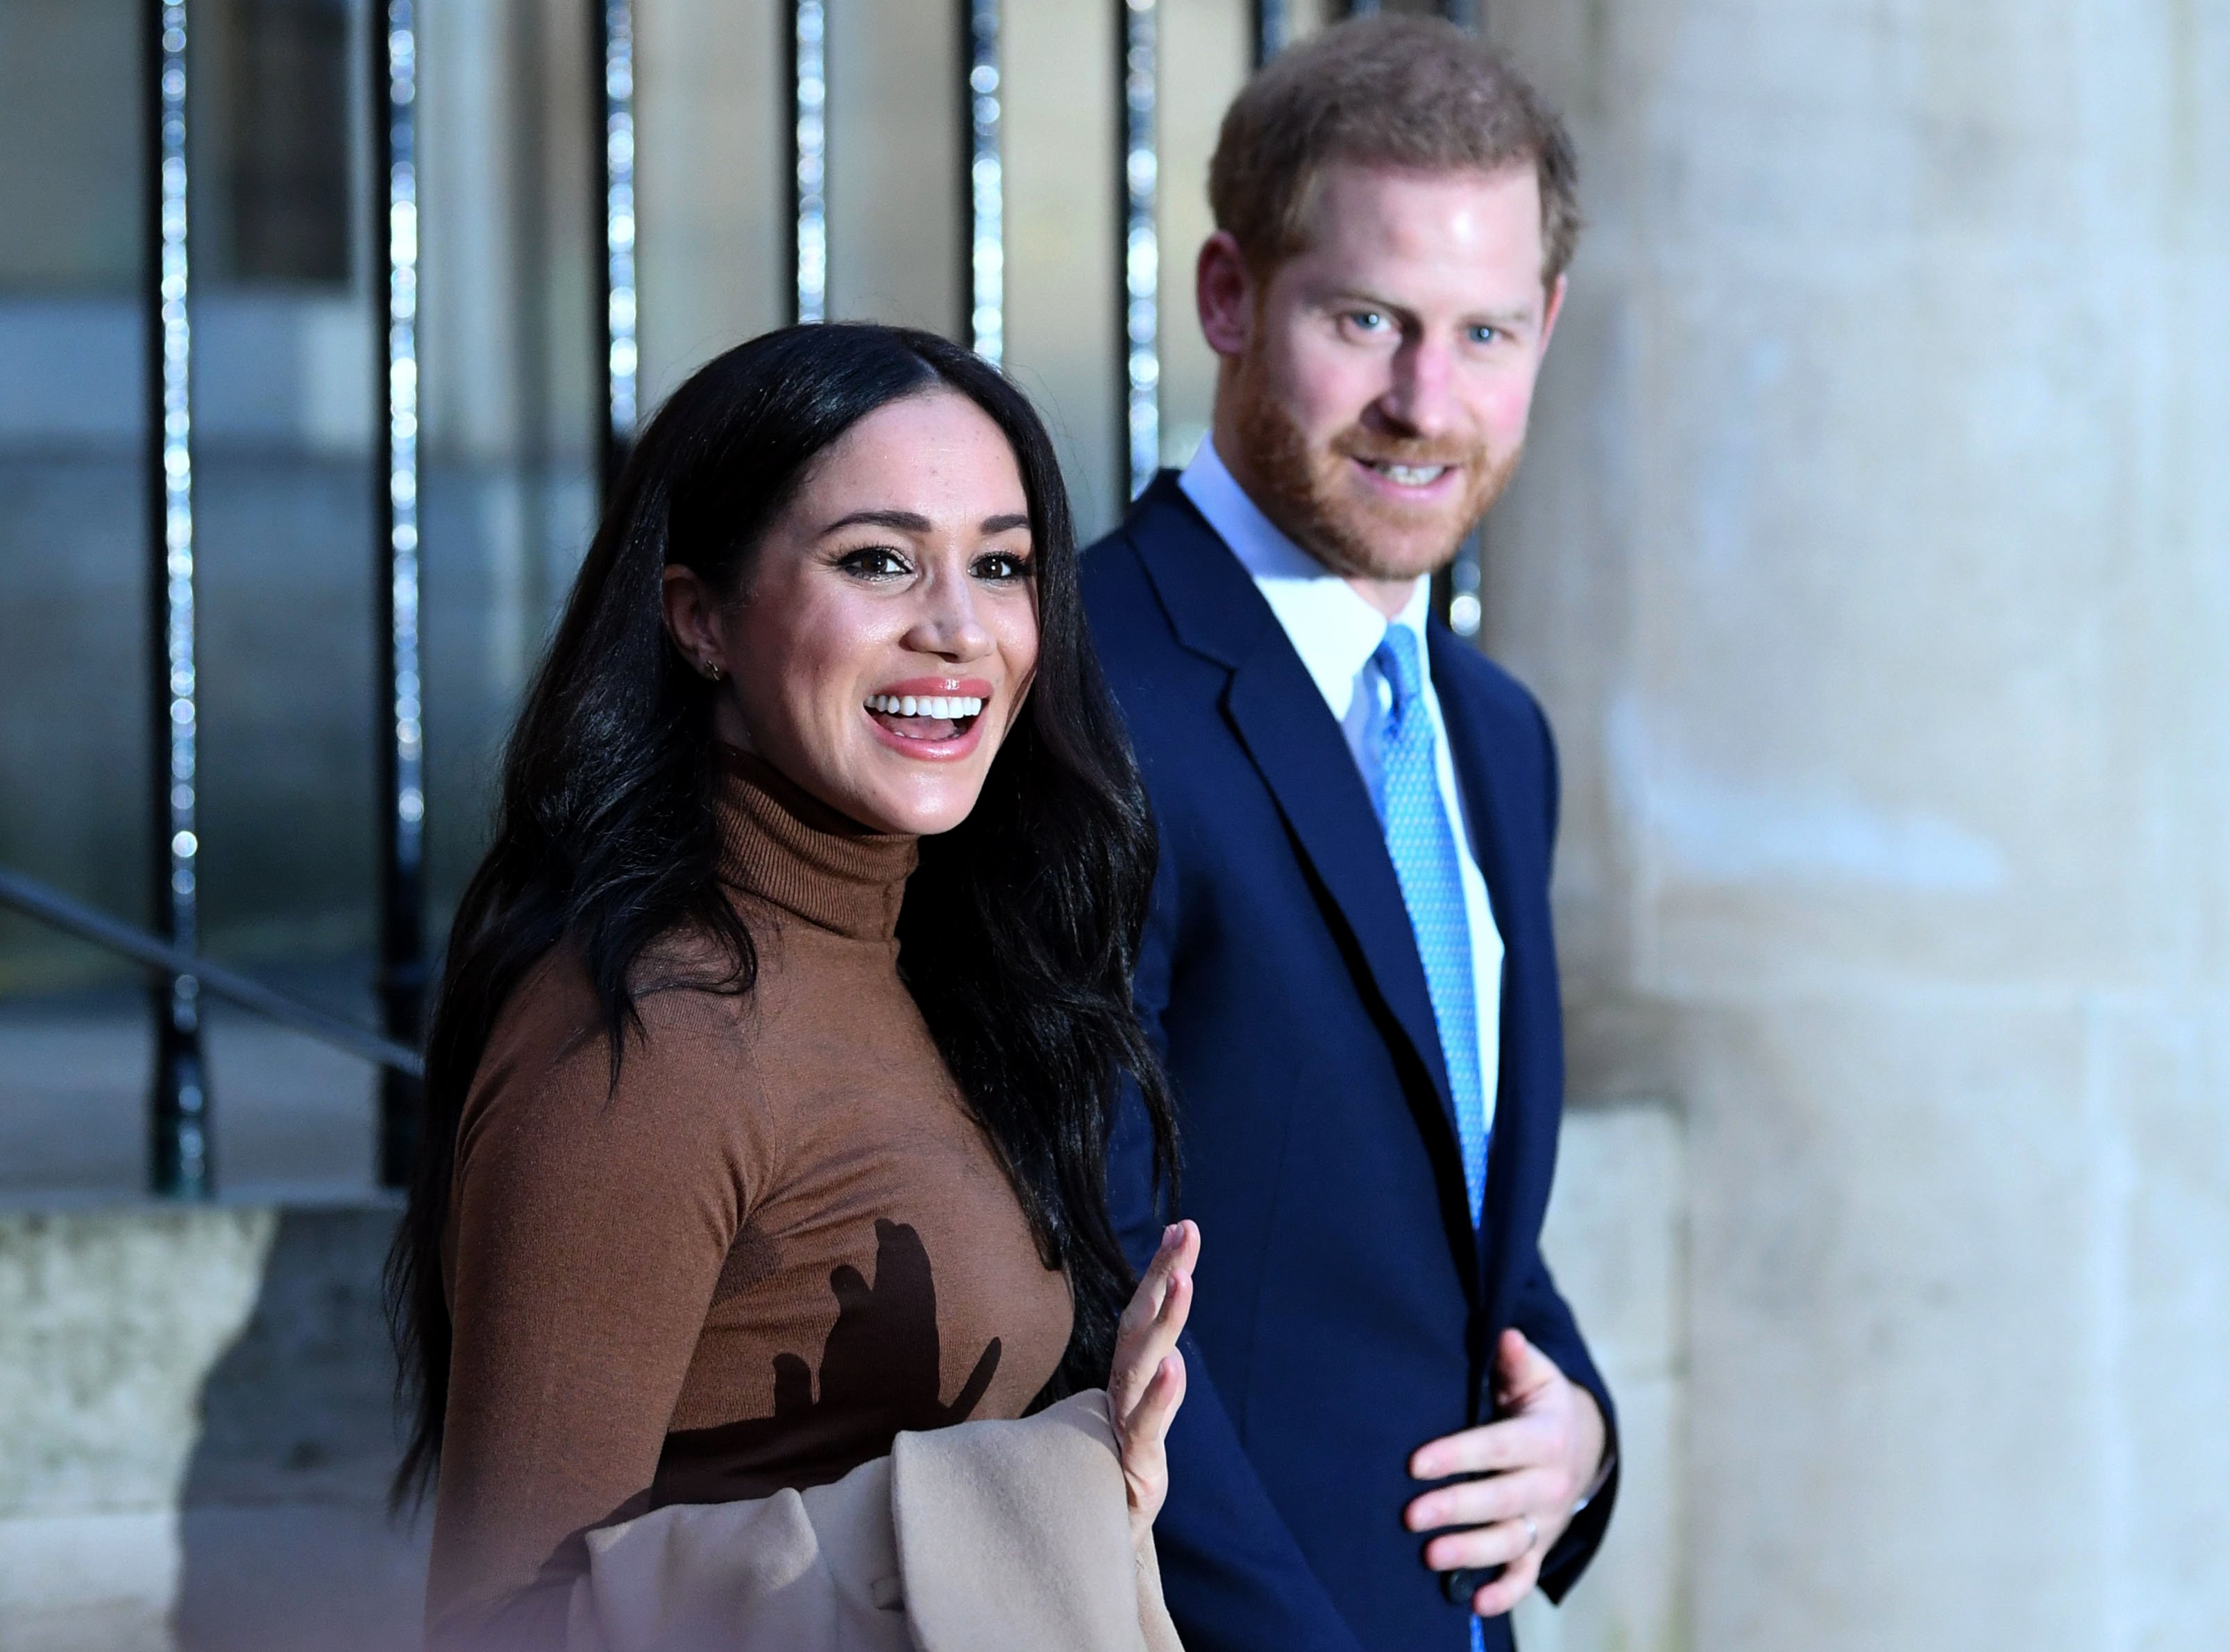 Prince Harry and Meghan Markle visit Canada House on January 7, 2020, in London, England. | Source: Getty Images.